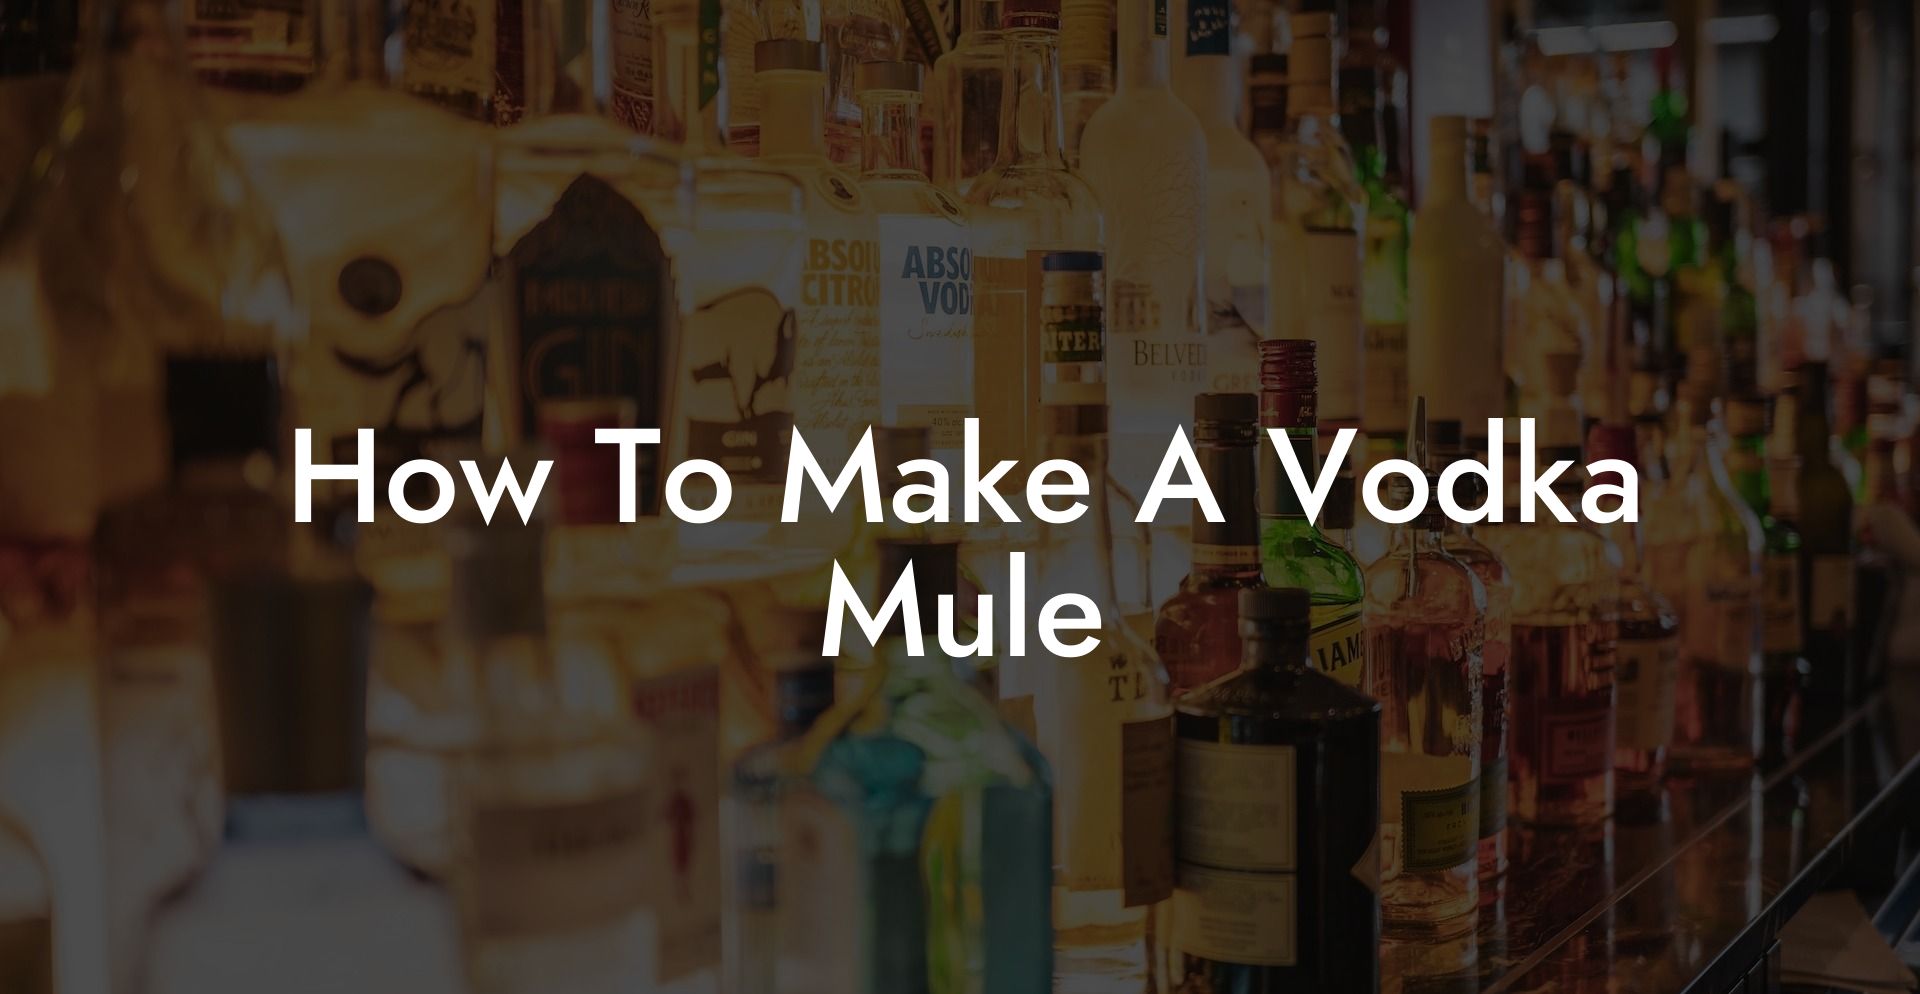 How To Make A Vodka Mule